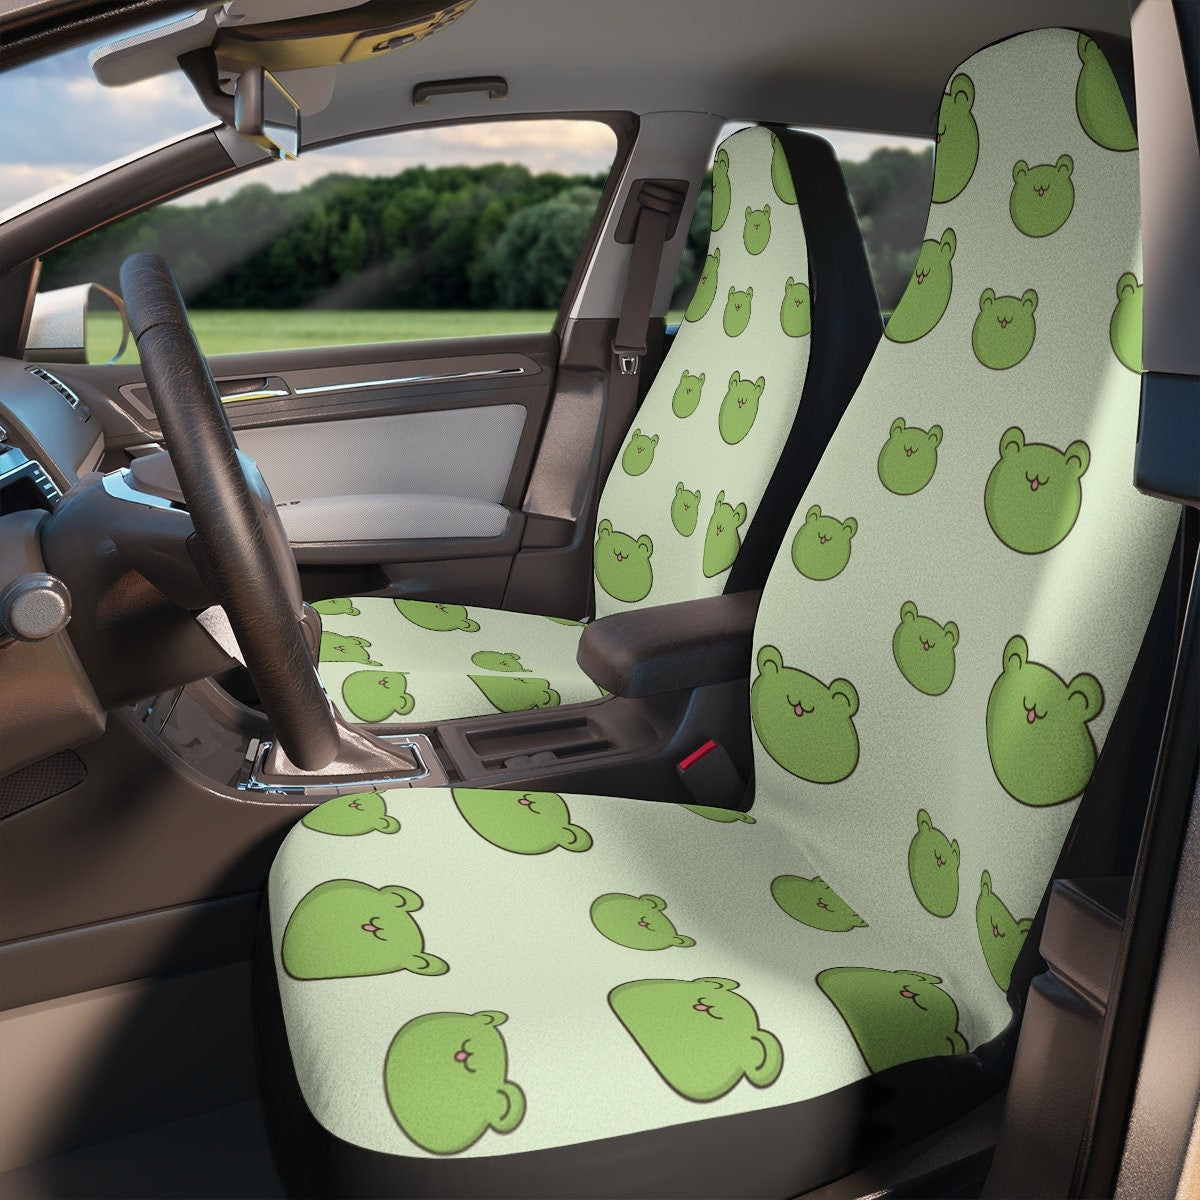 Car Seat Covers, Frogs Cute Car Accessories for Women, Hippie Toad Car Decor, Universal Car Chair Cover, Boho Cottagecore Vehicle Seat Cover